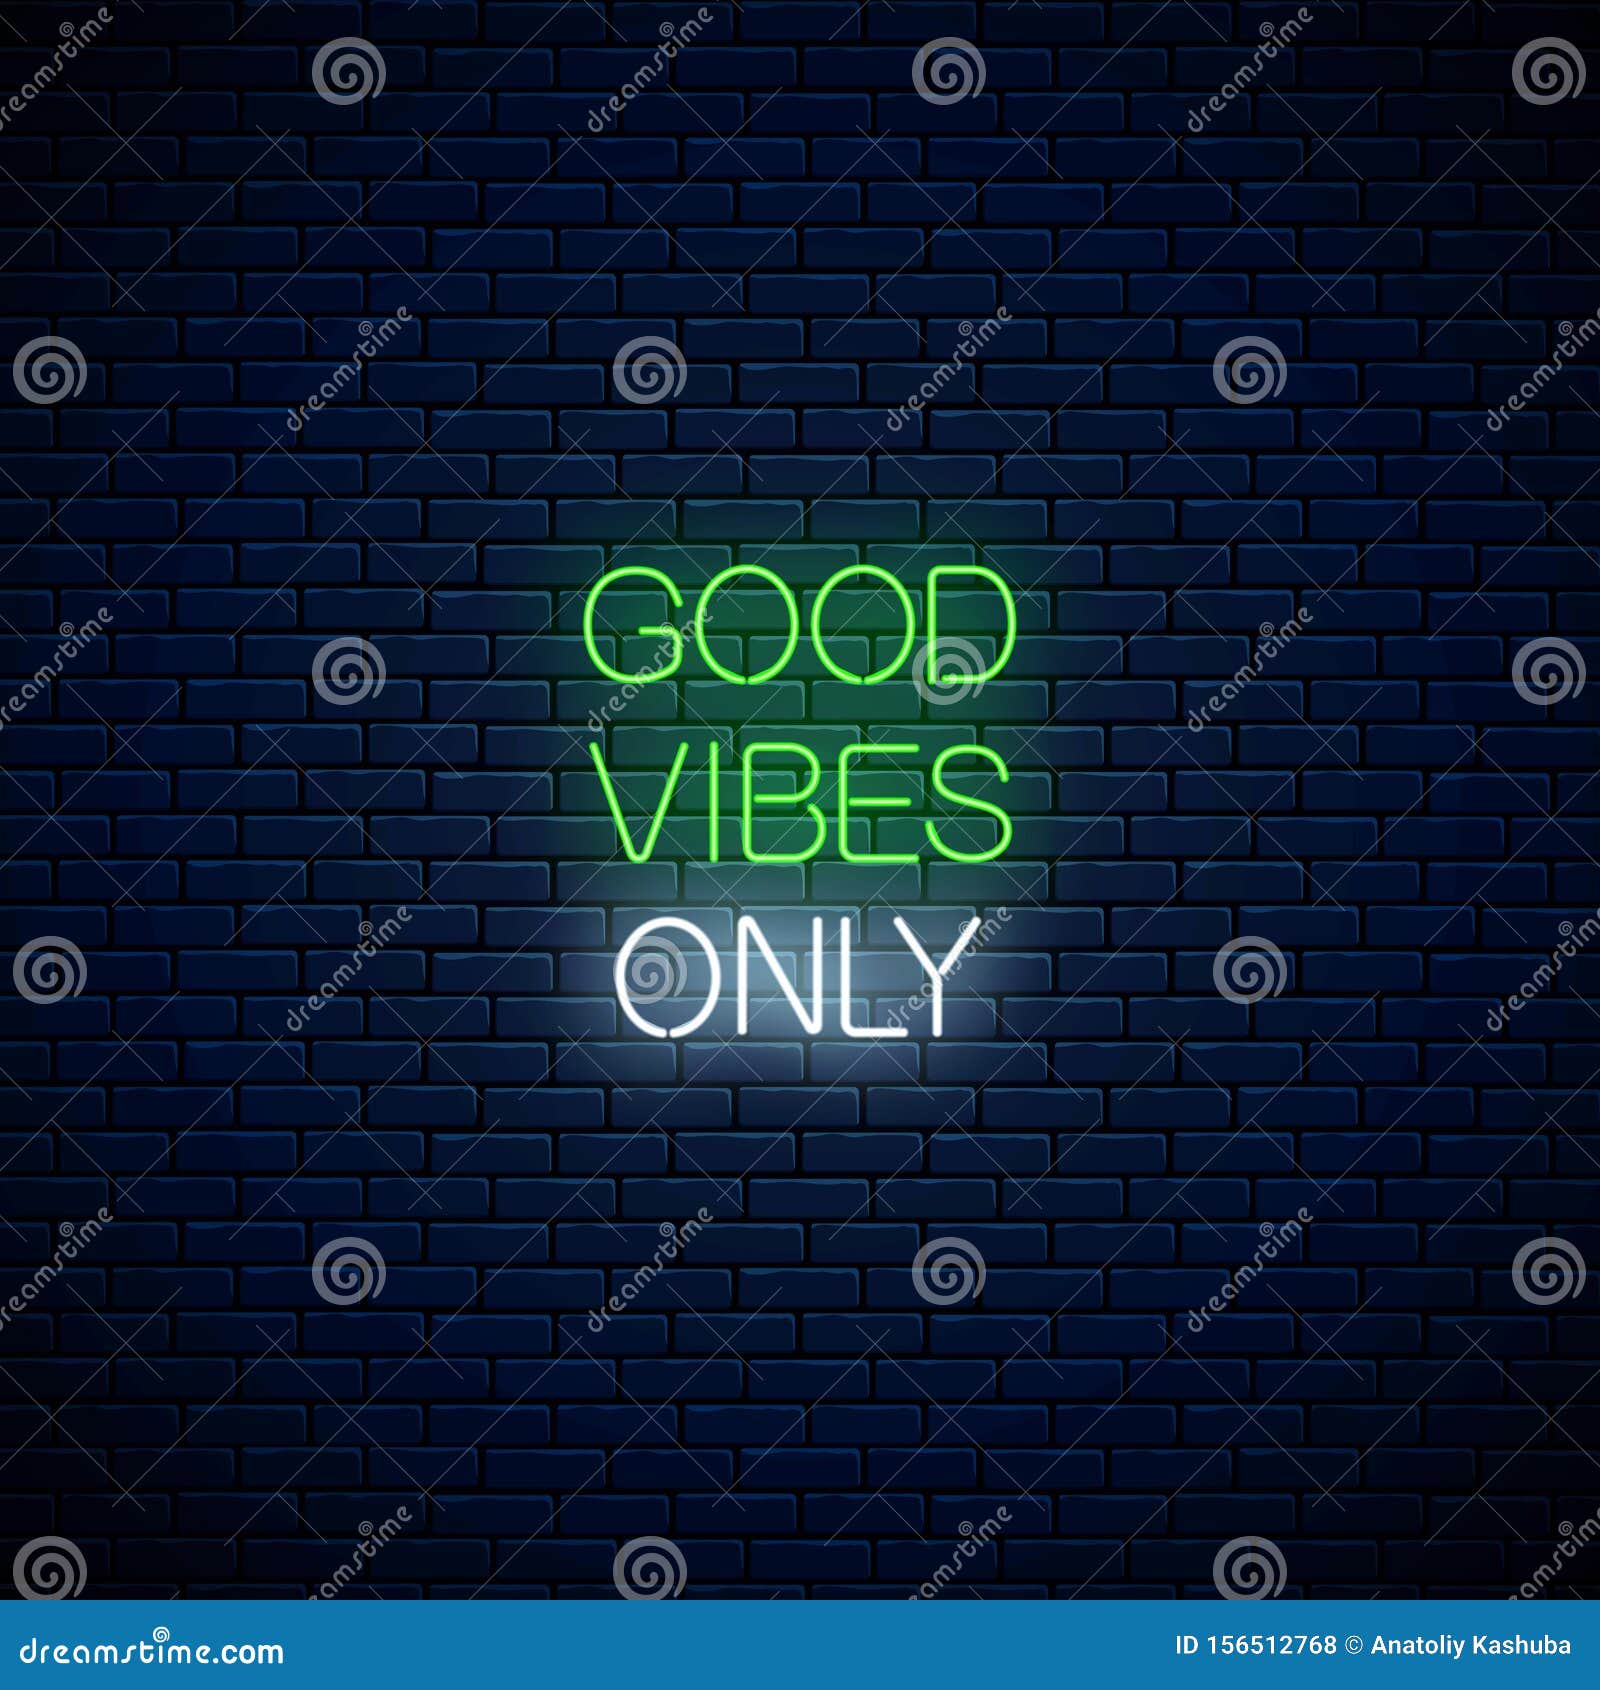 Good Vibes only - Glowing Neon Inscription Phrase. Motivation